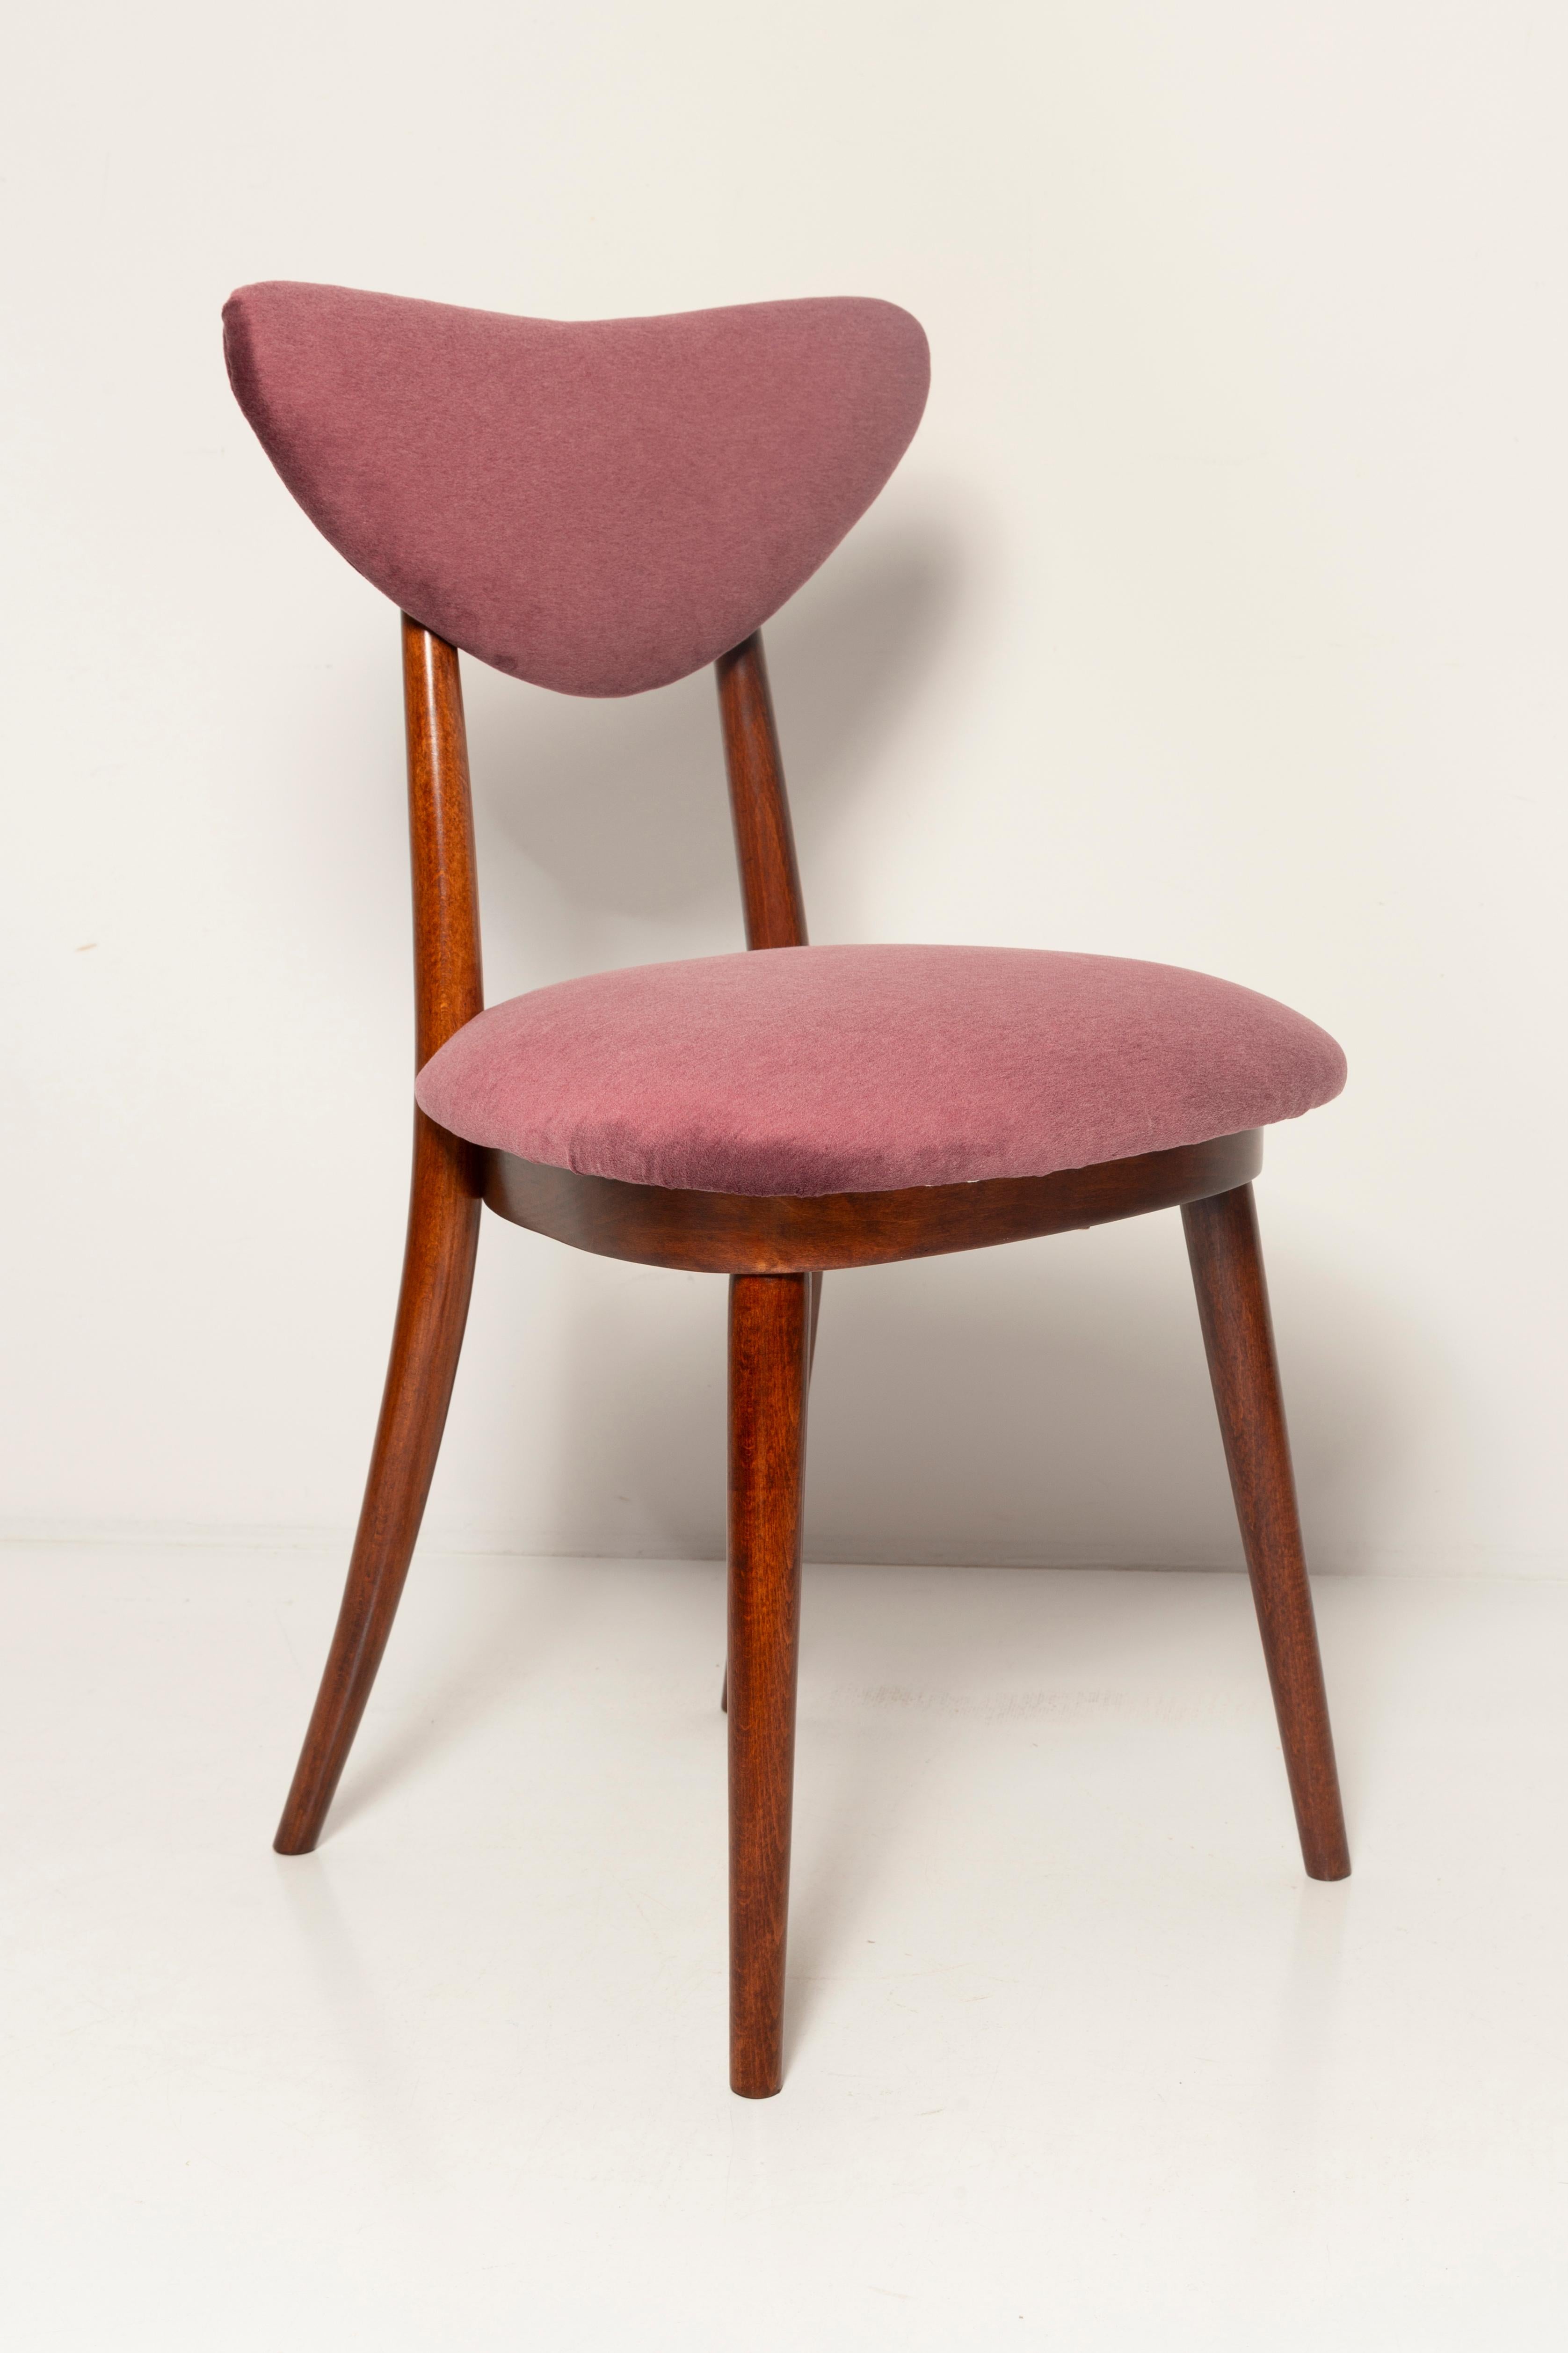 Hand-Crafted Midcentury Plum Violet Velvet Heart Chair, Europe, 1960s For Sale